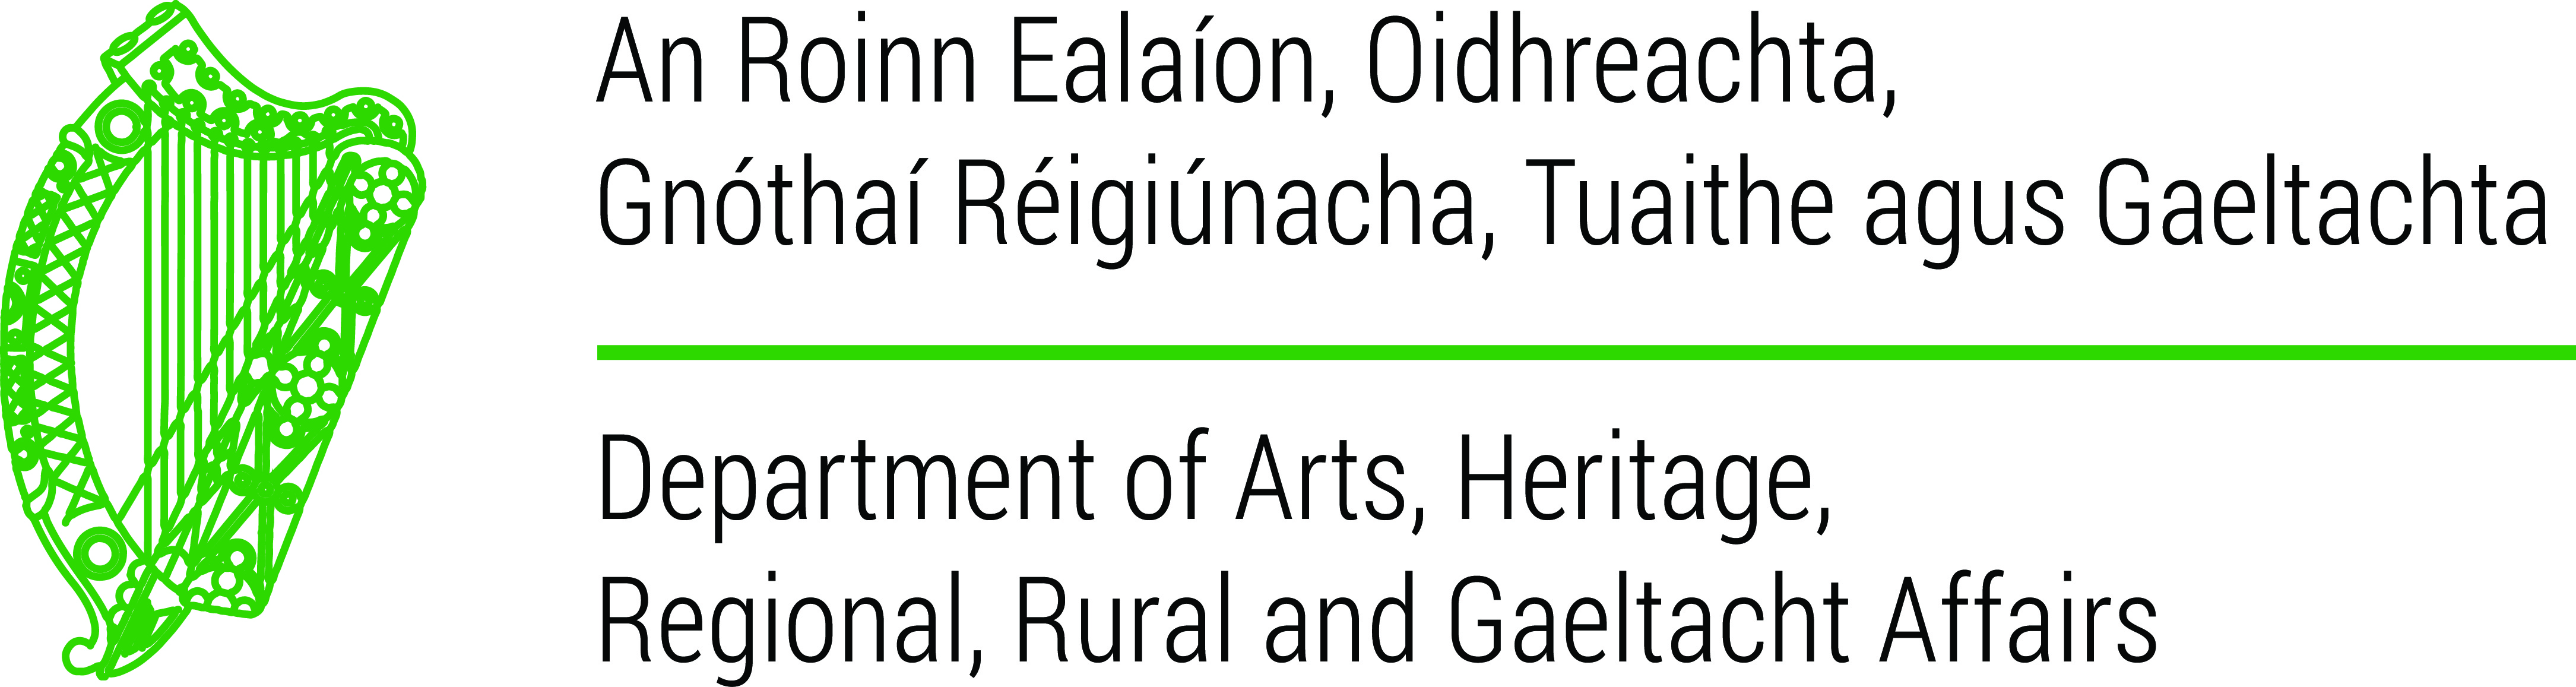 Department of Arts, Heritage and the Gaeltacht logo